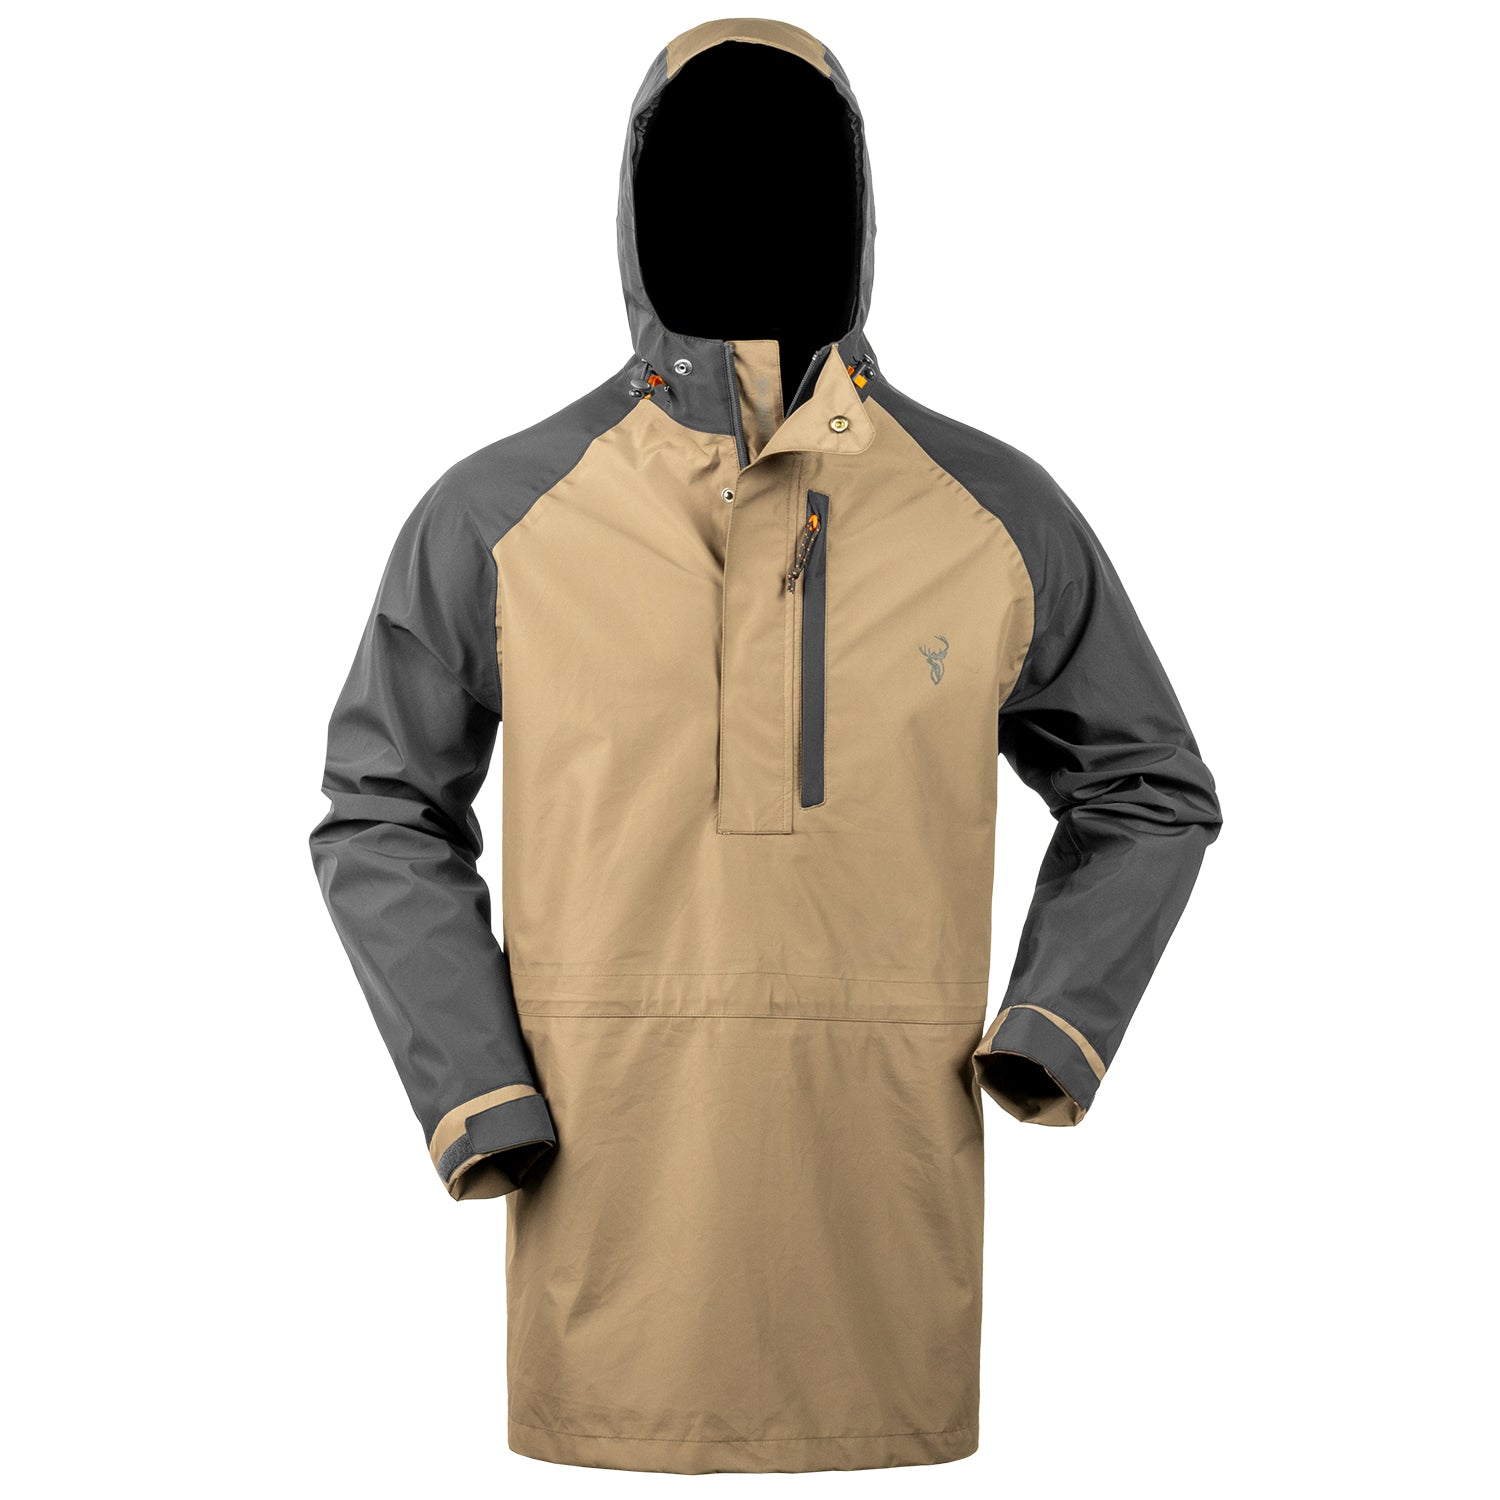 The hunting jacket for extremely cold conditions I BLASER